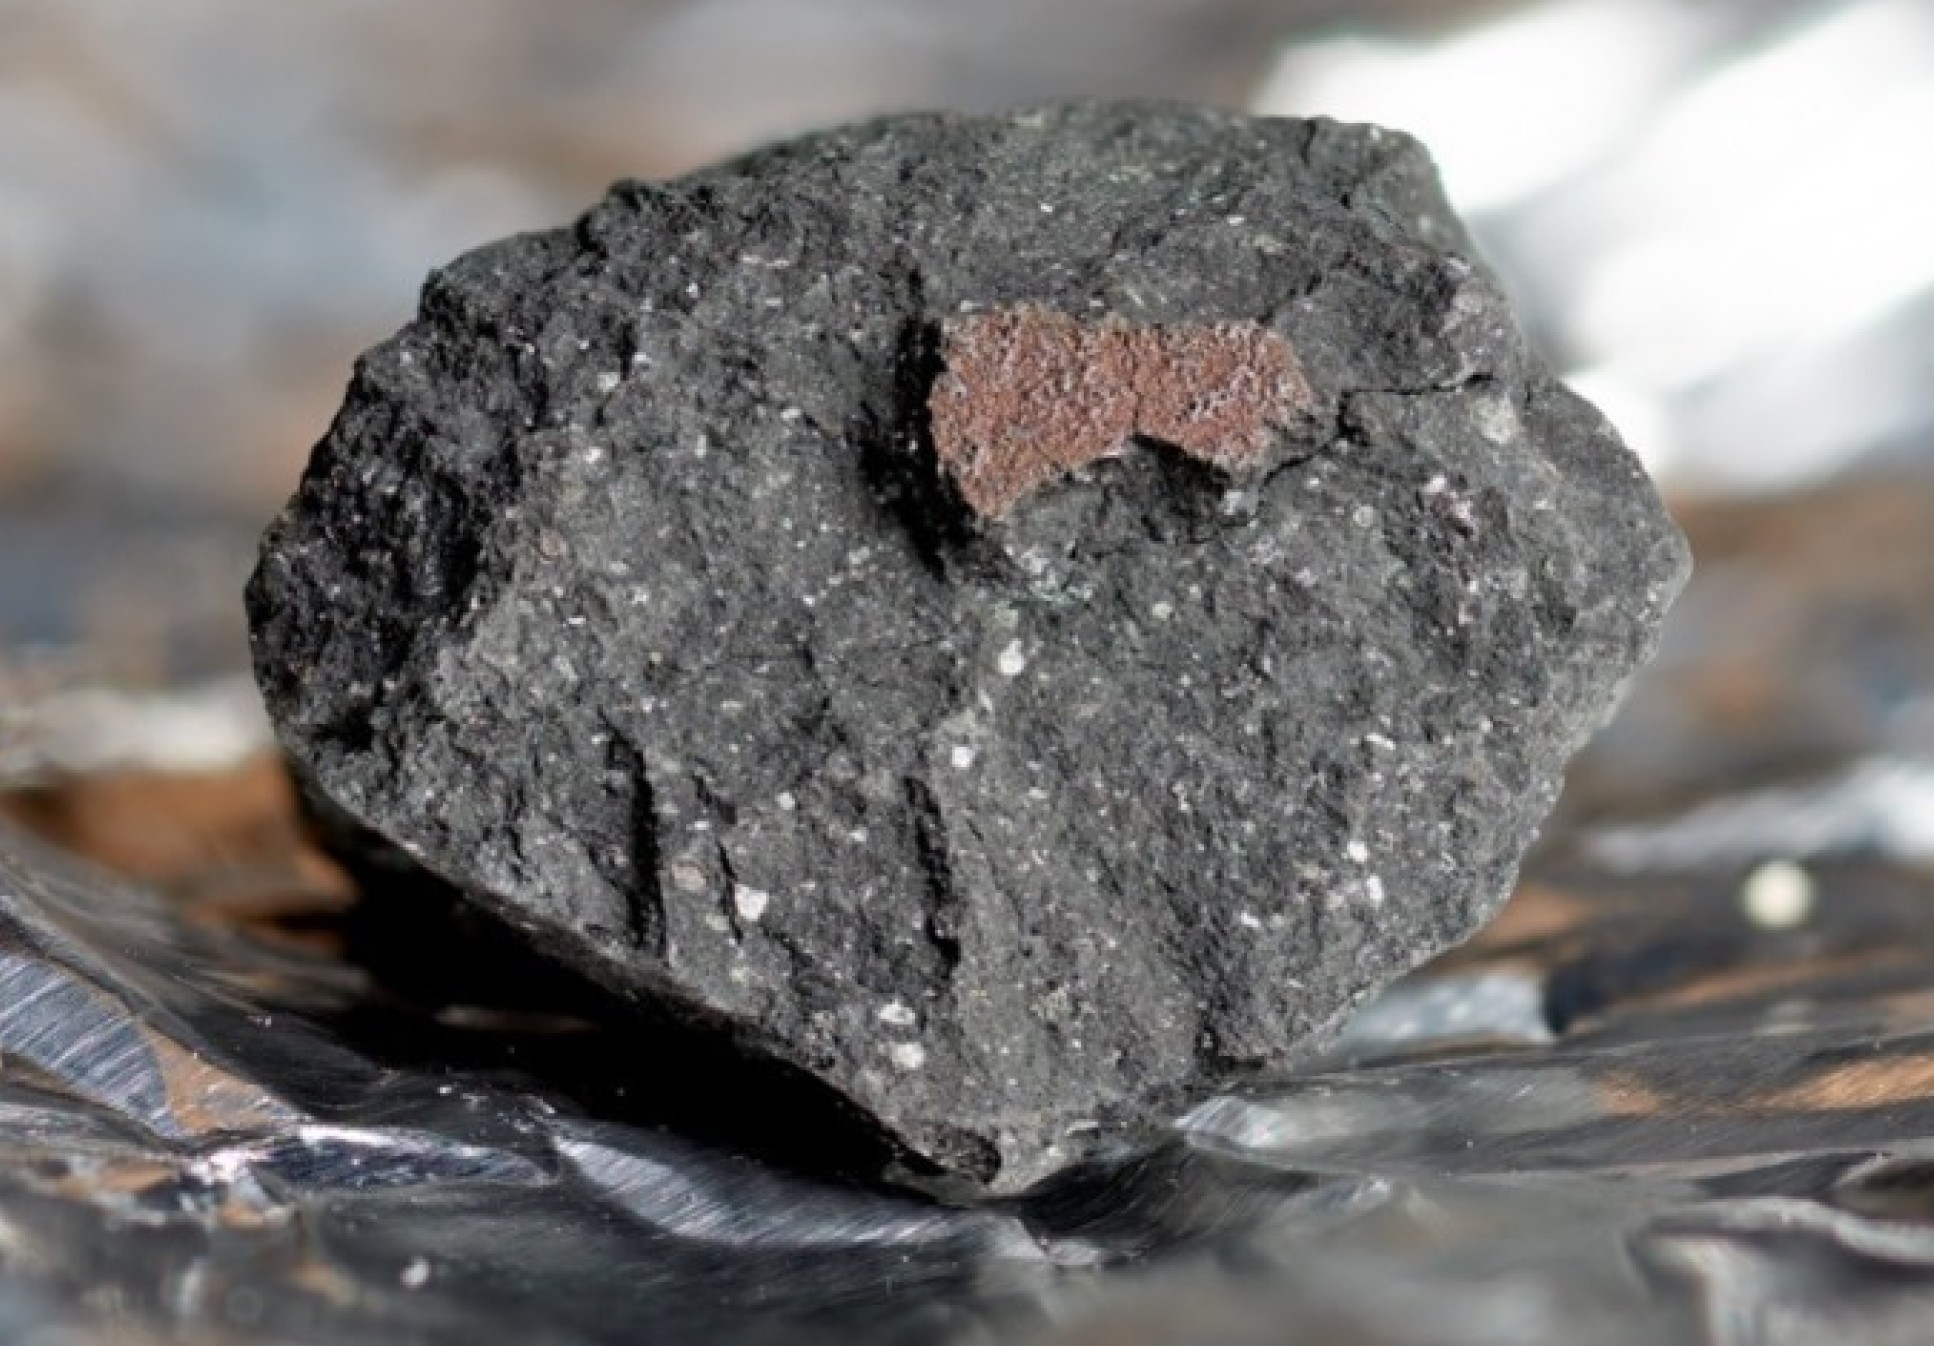 A meteorite that landed in the UK in March 2021